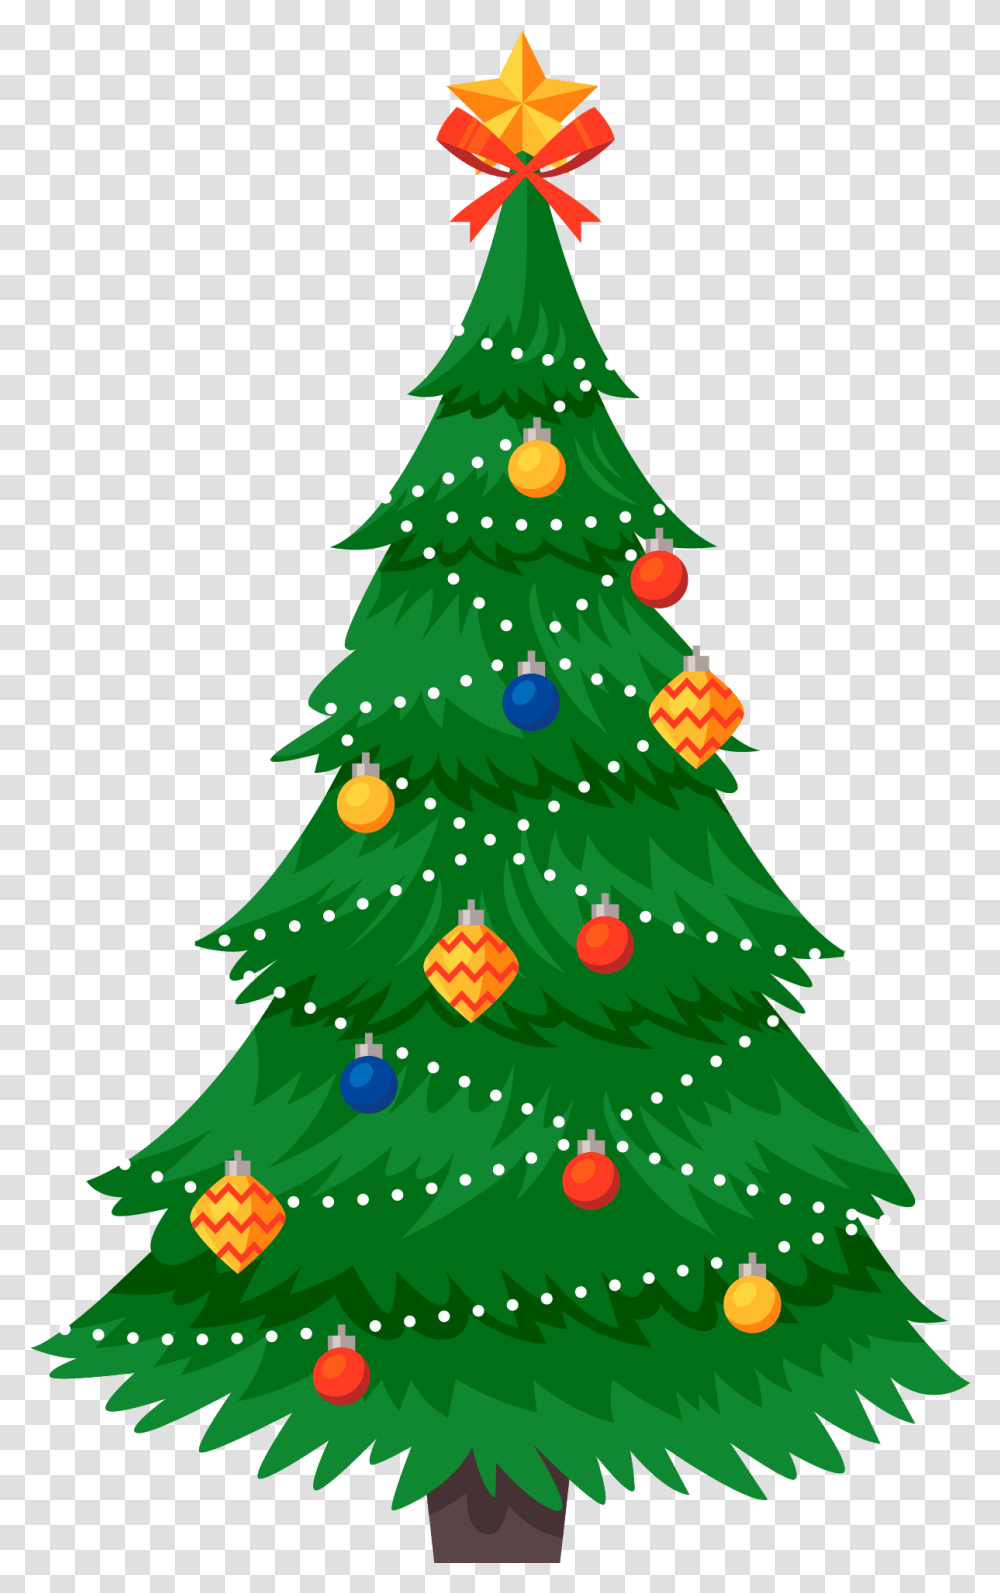 Cute Christmas Tree Clipart Hd Download Christmas Photos Clipart, Ornament, Plant, Star Symbol Transparent Png